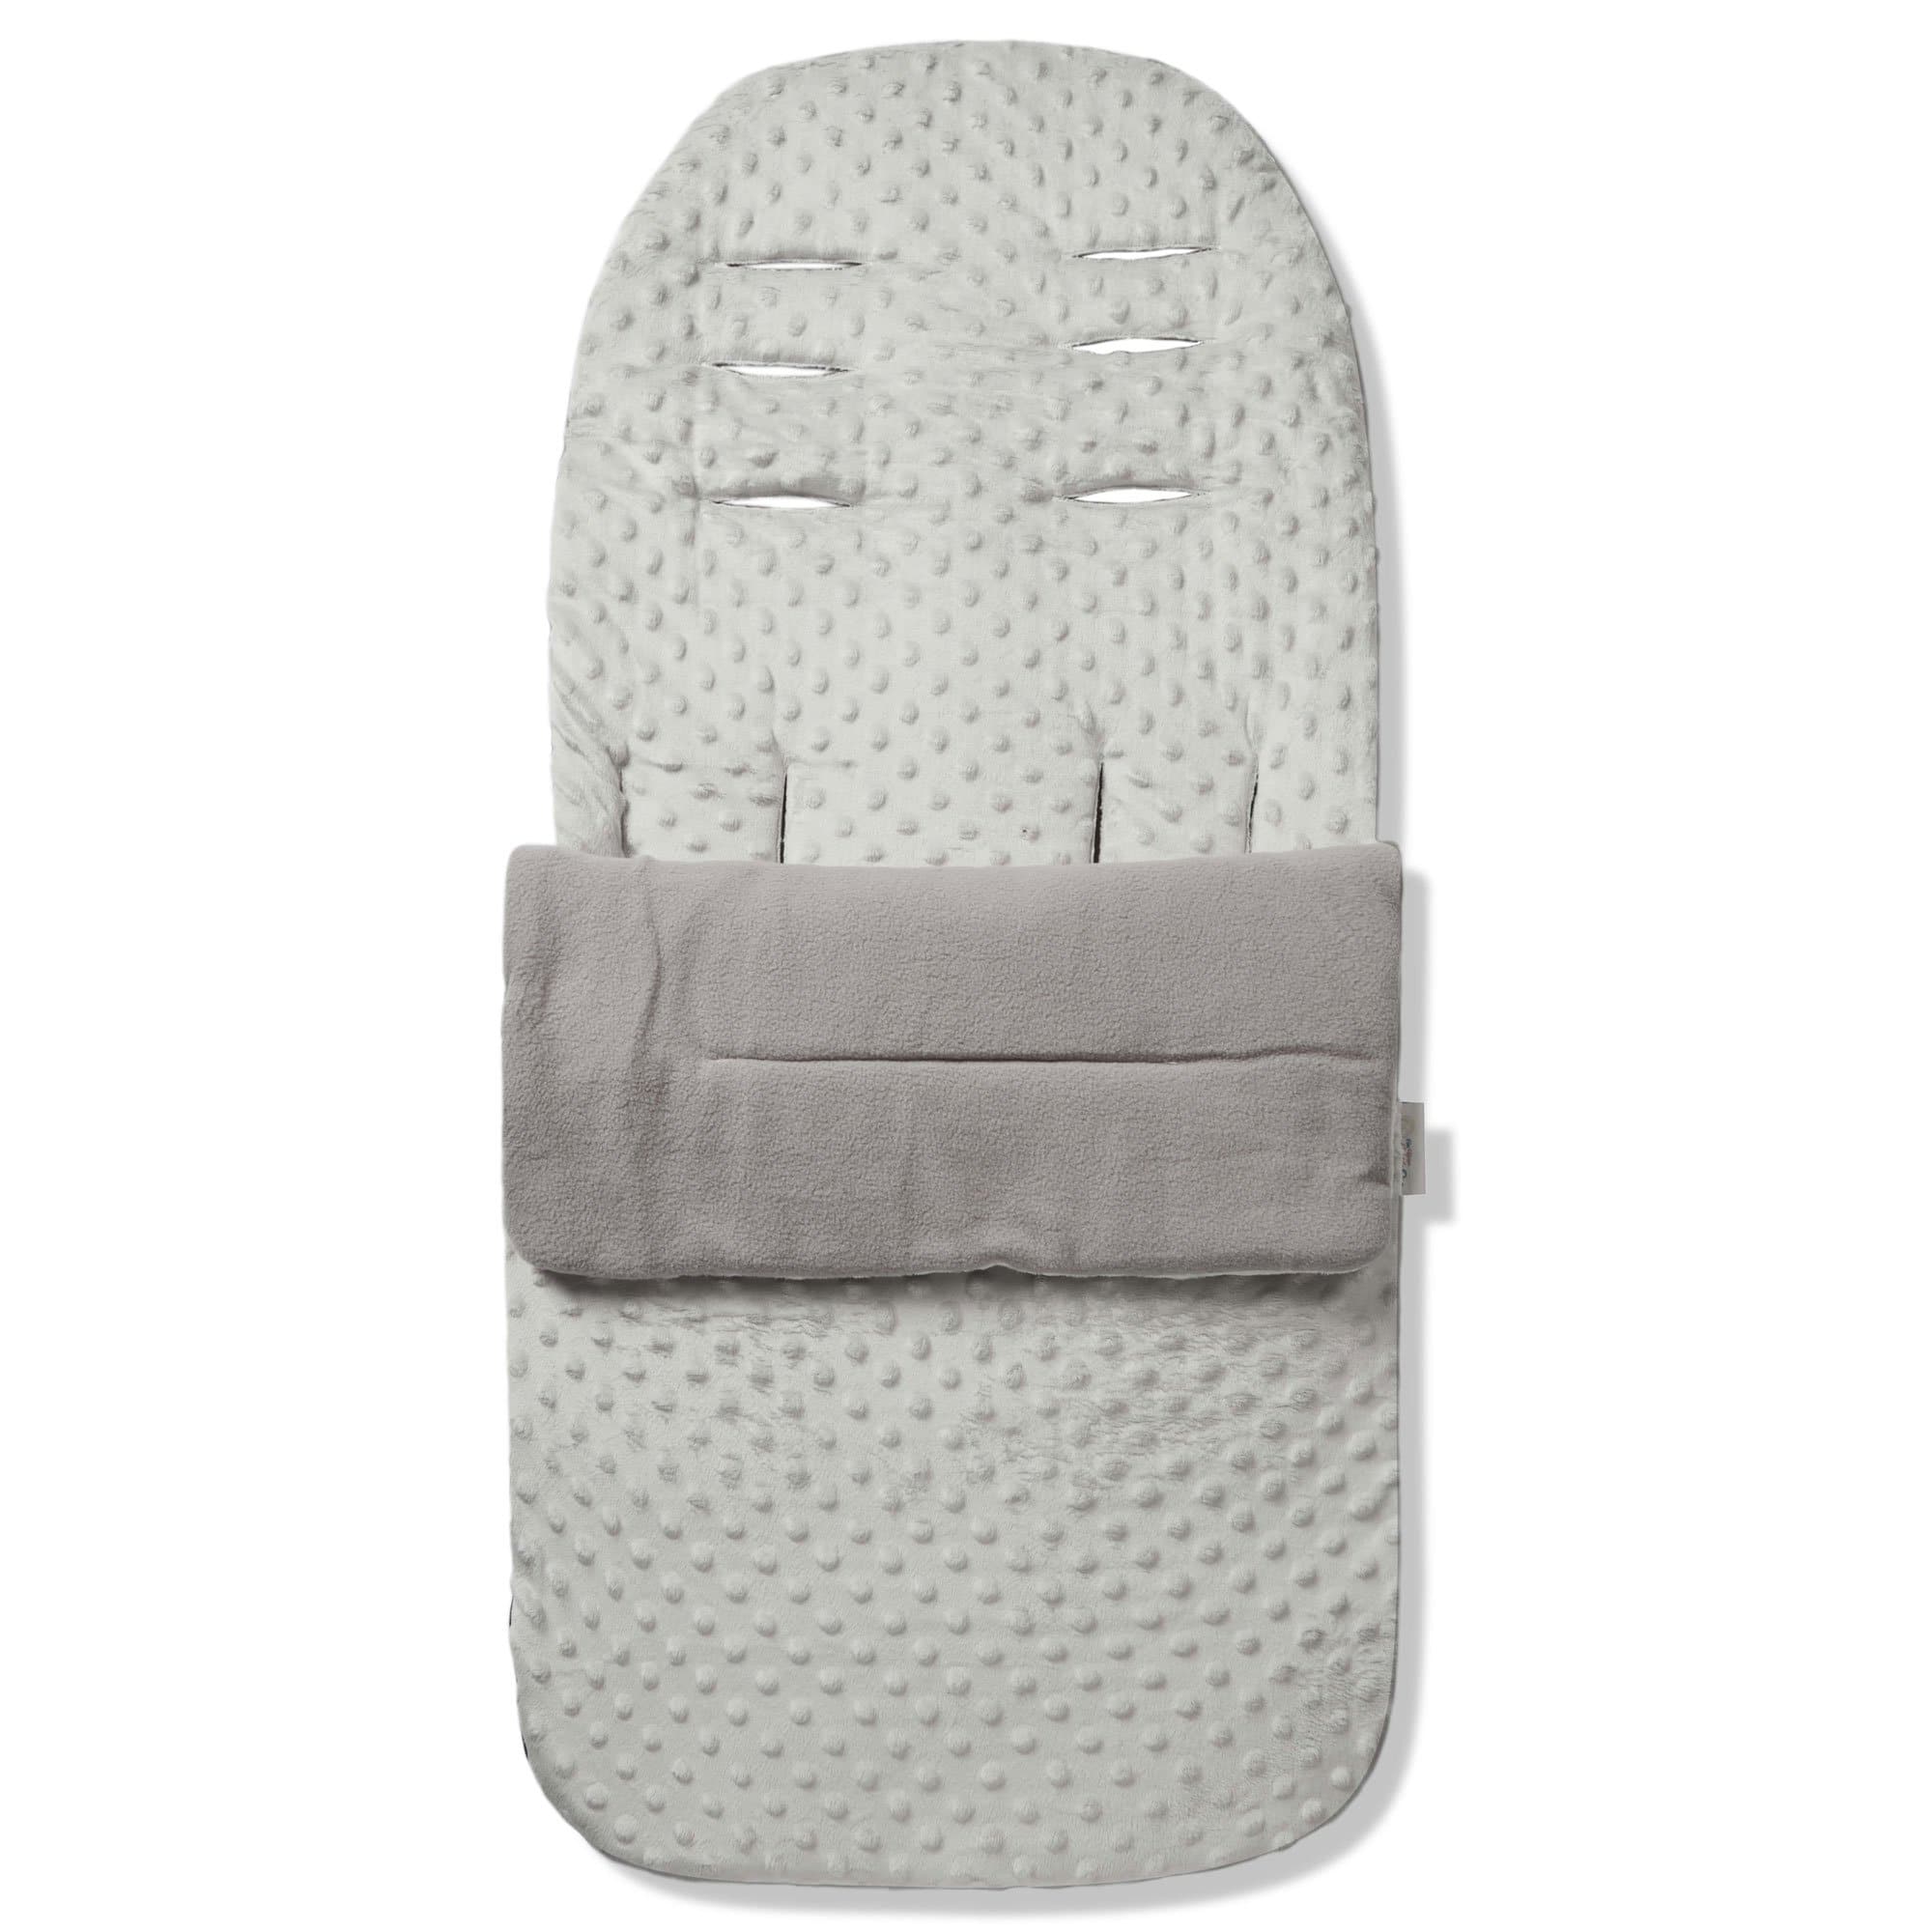 Dimple Footmuff / Cosy Toes Compatible with I'coo - Grey / Fits All Models | For Your Little One